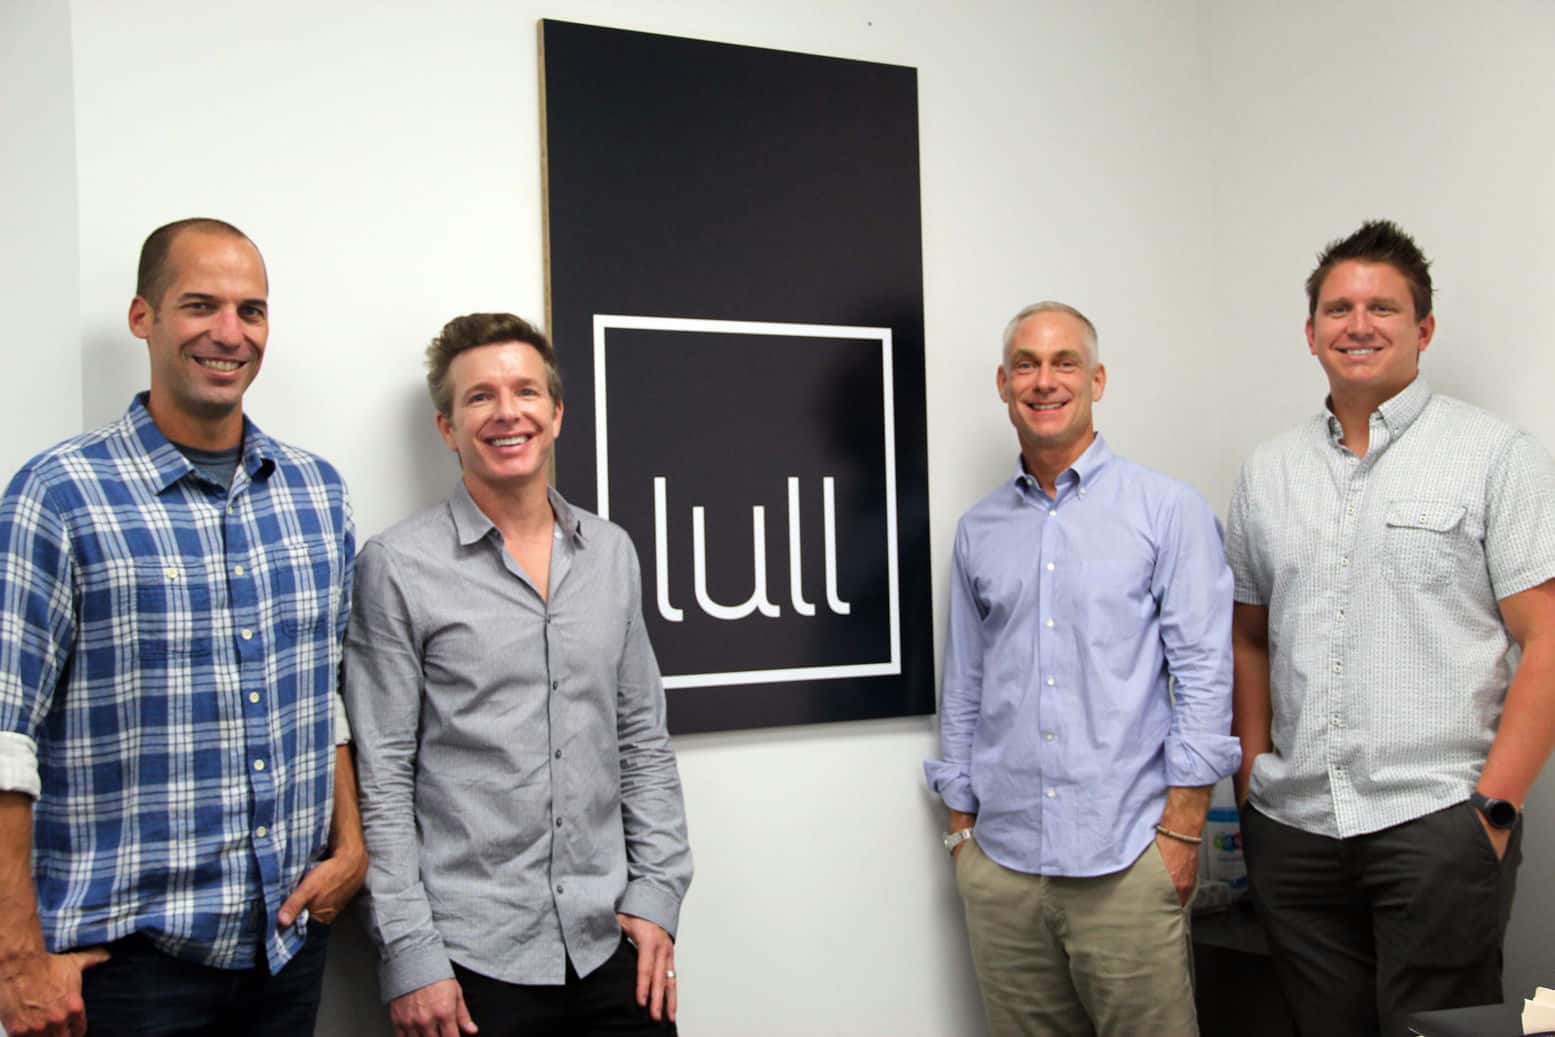 The four lull founders standing in front of a giant board with the lull logo.